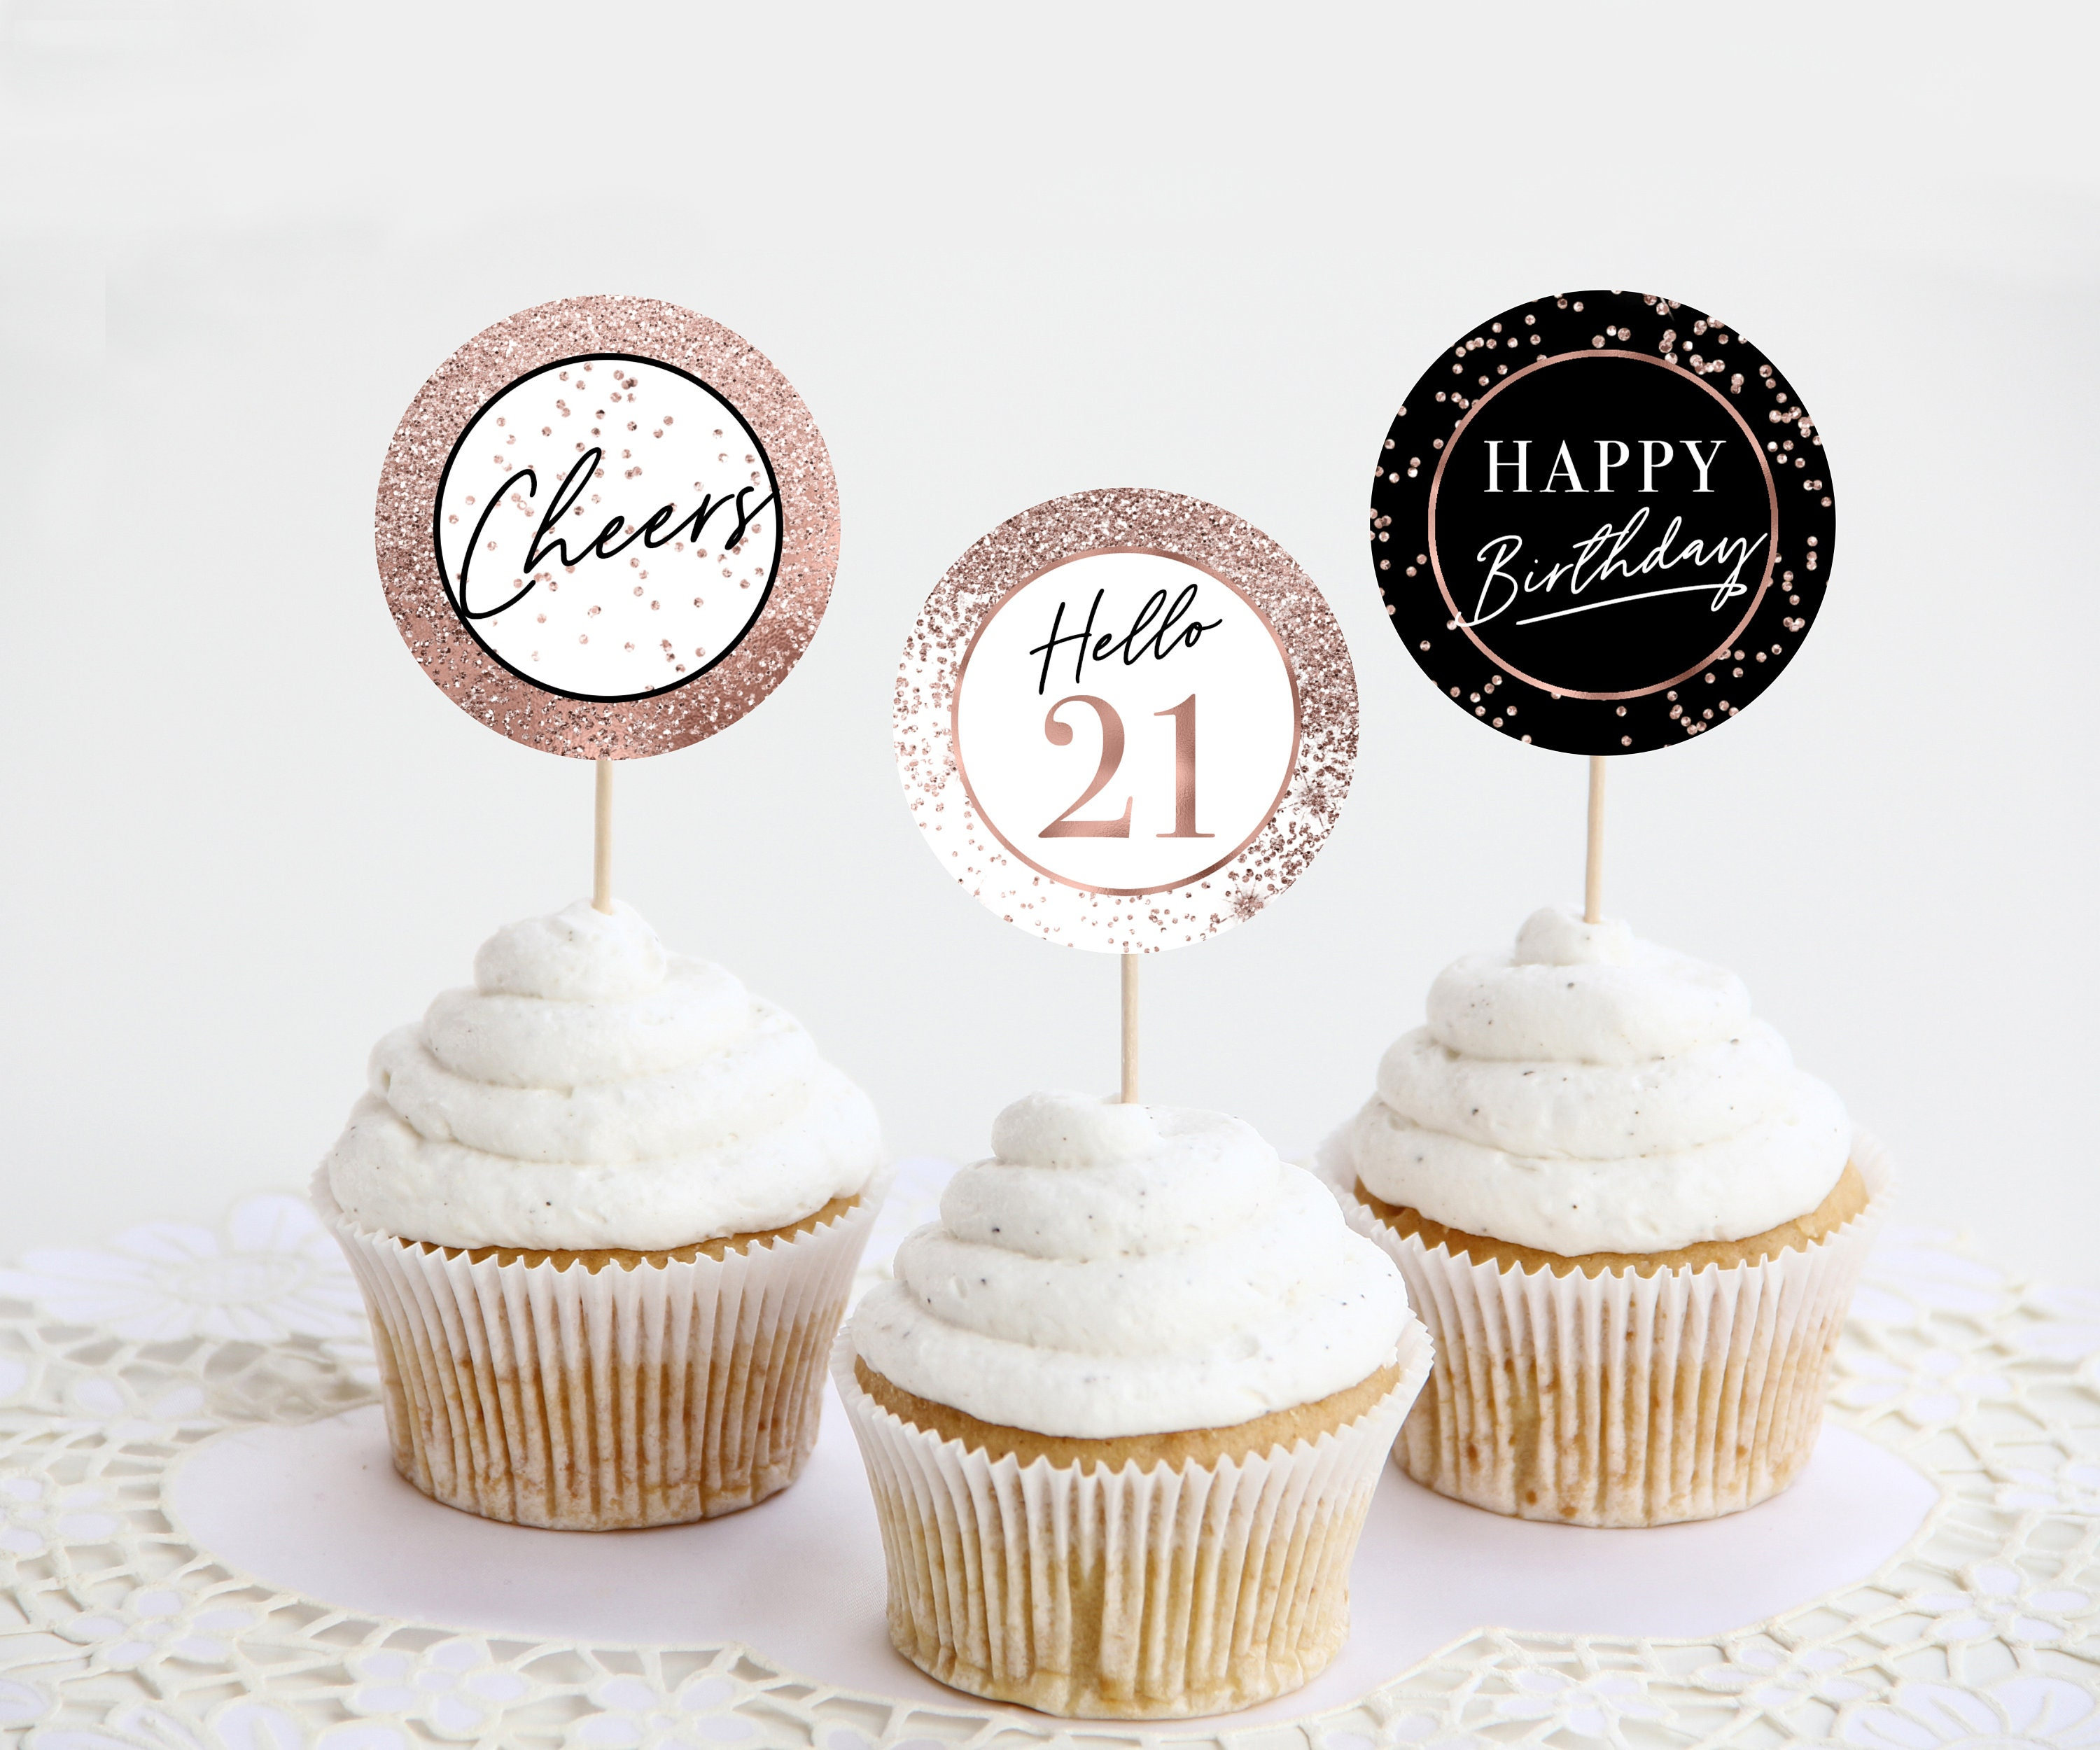 Acrylic Happy 21st Birthday Cake Topper and Name Cake Charm, Gold Mirror Cake  Topper, 21st Birthday Cake Decorations, Acrylic Cake Toppers 